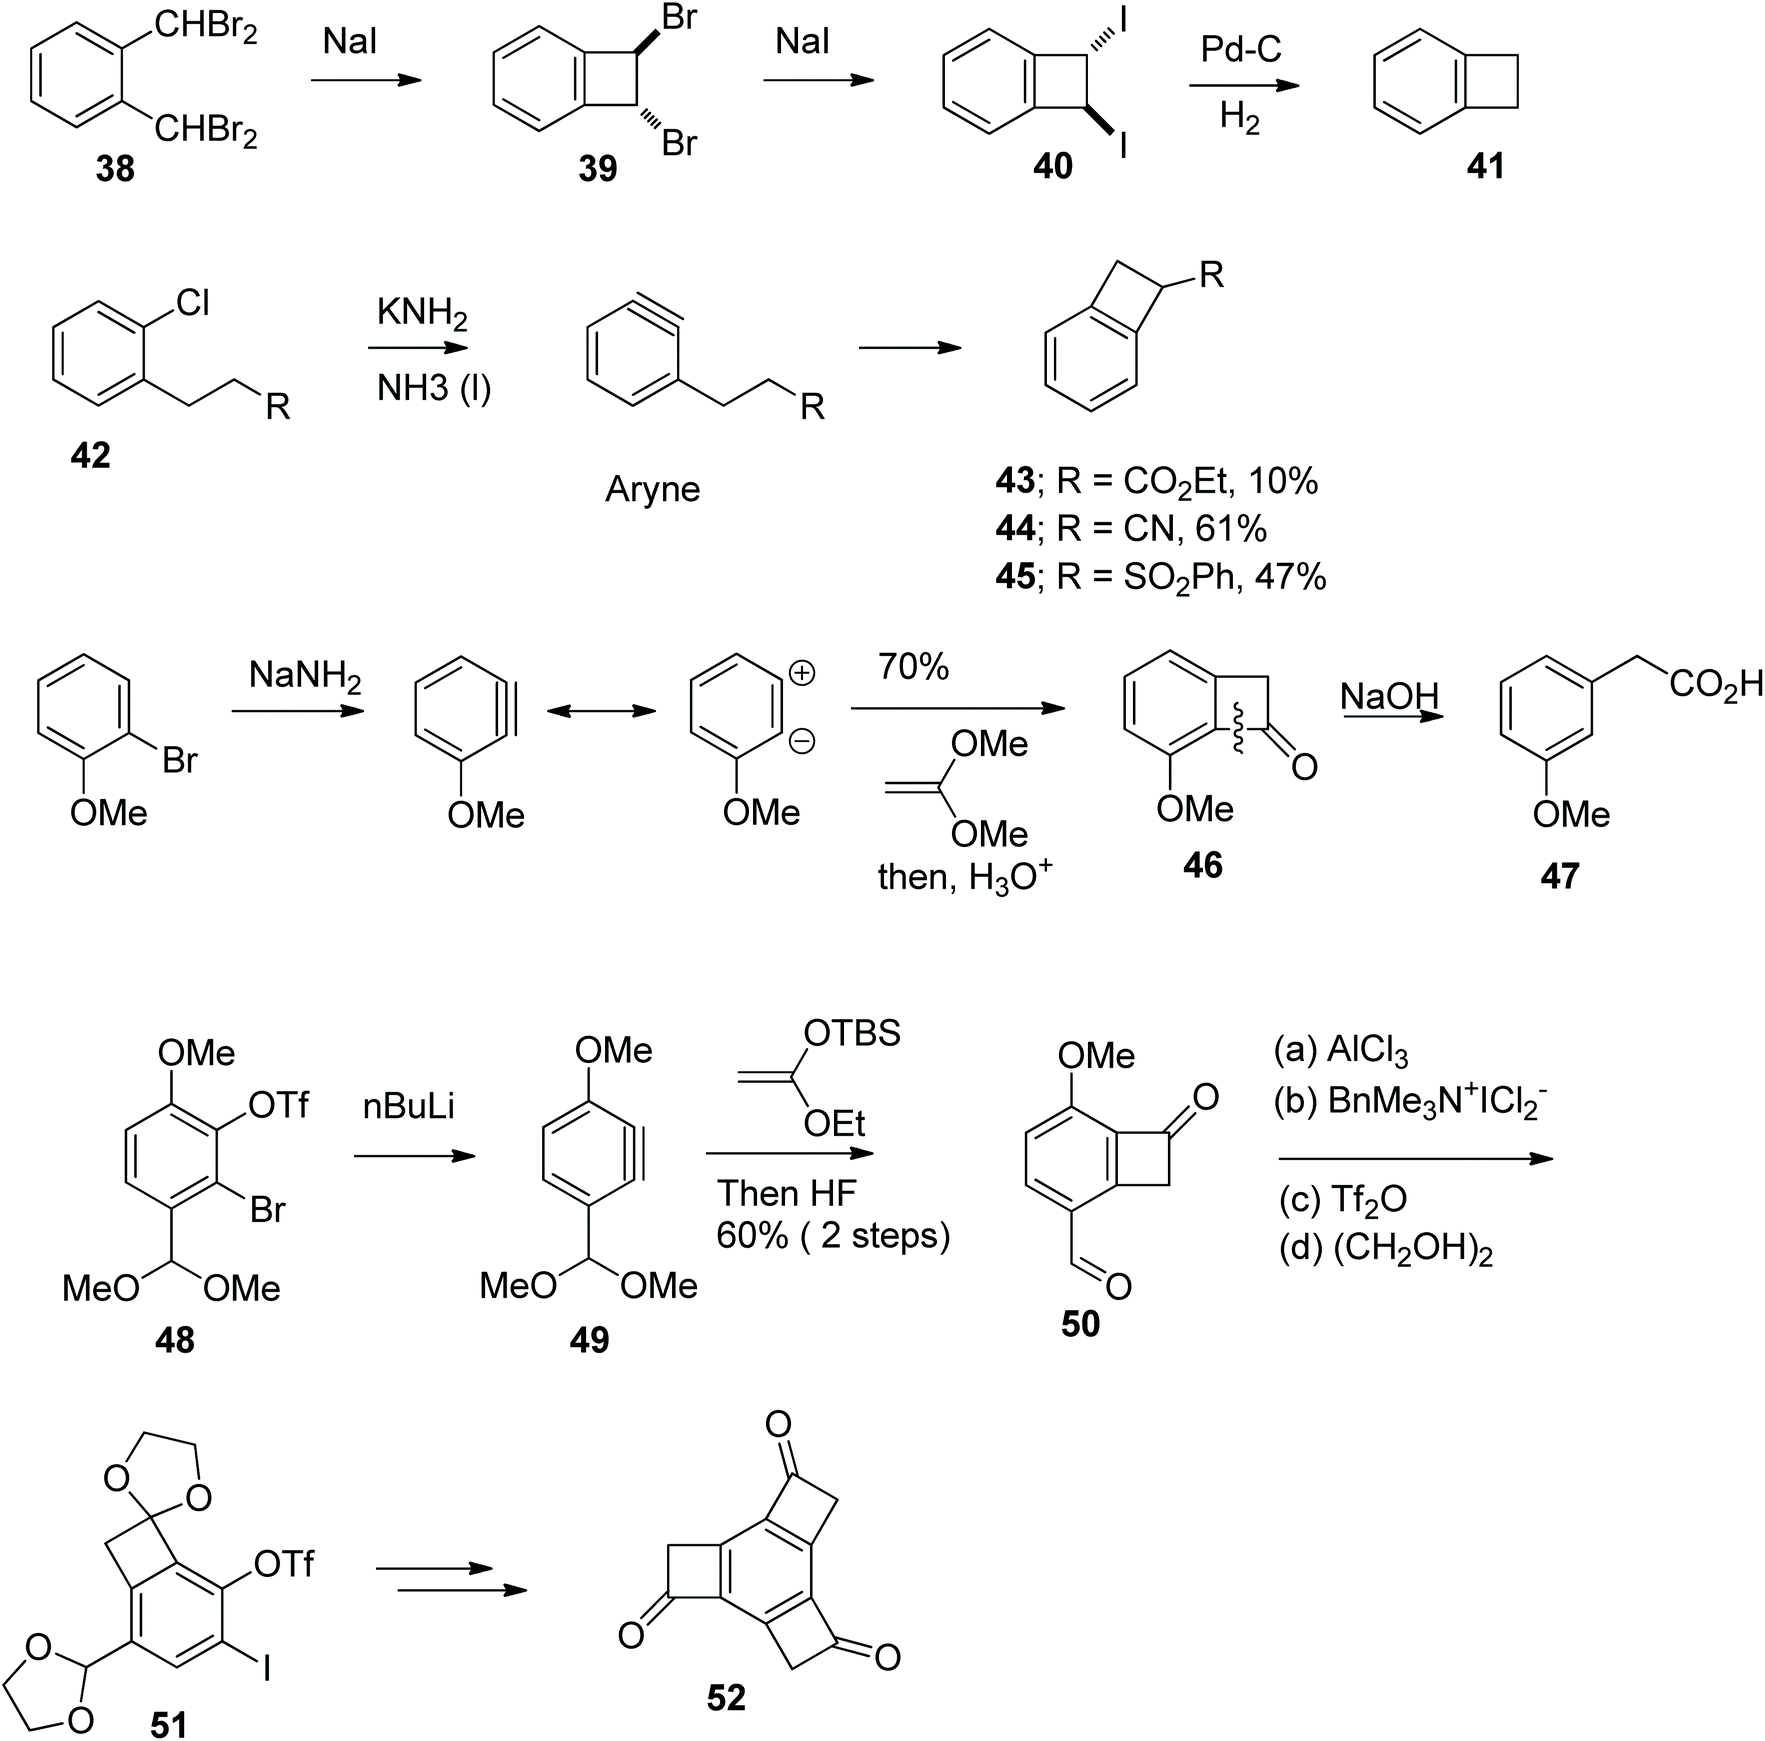 Cyclobutane based “overbred intermediates” and their exploration 